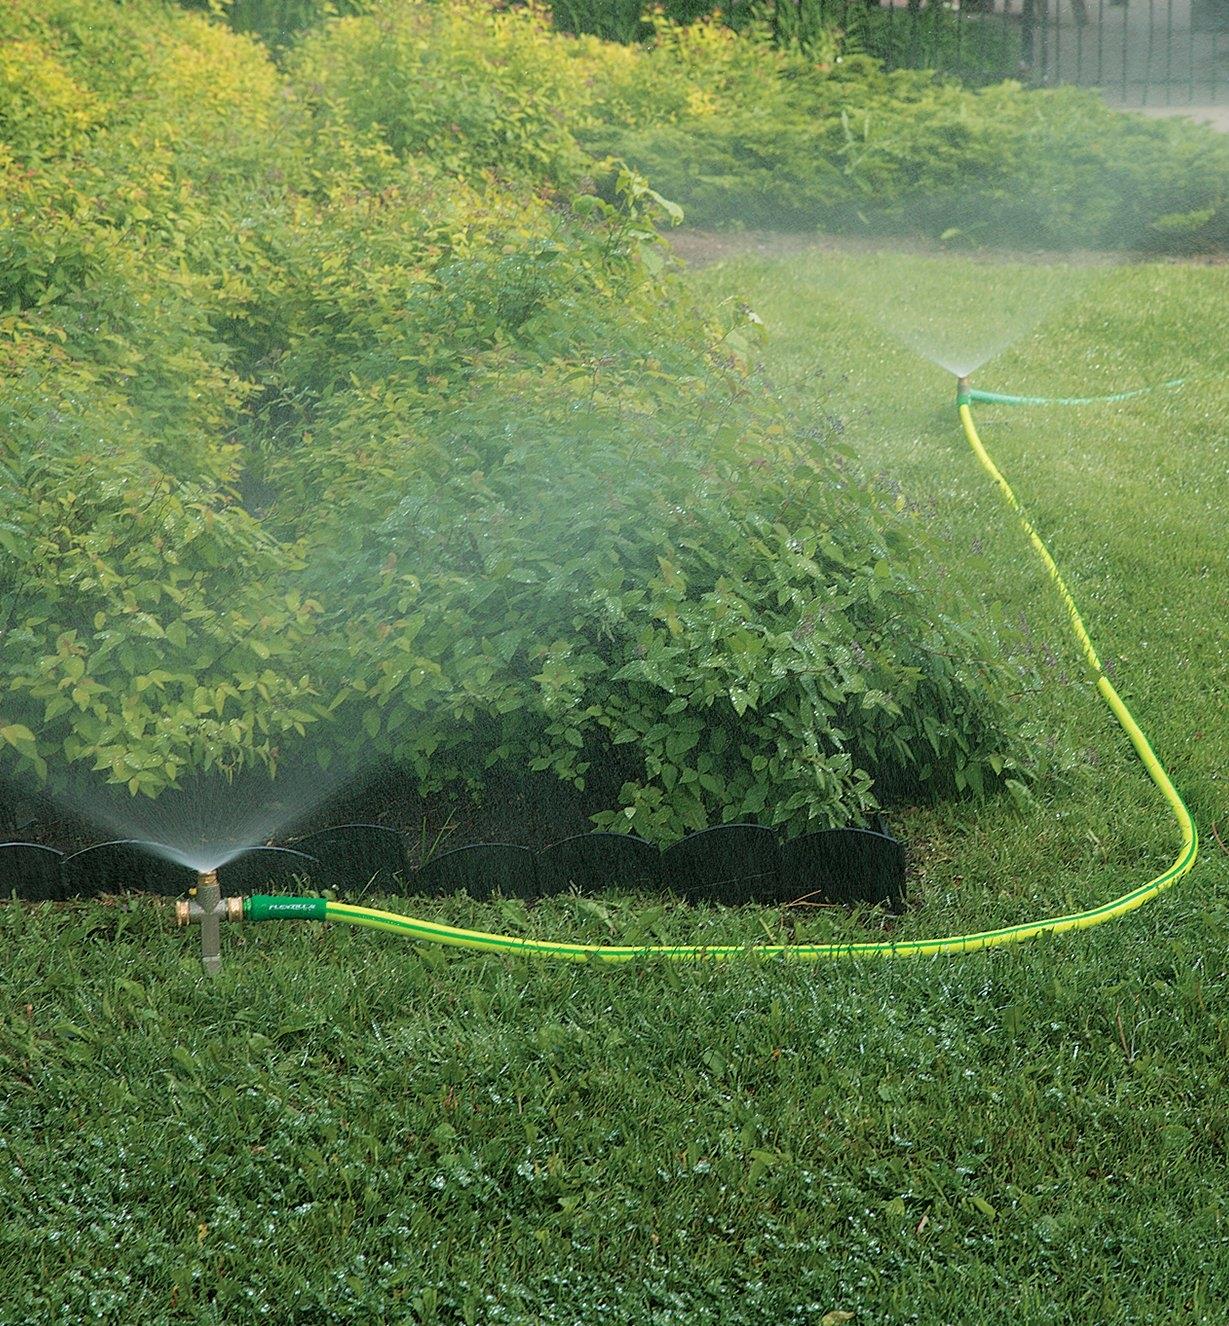 Two In-Line Spot Sprinklers linked by a hose, watering a yard